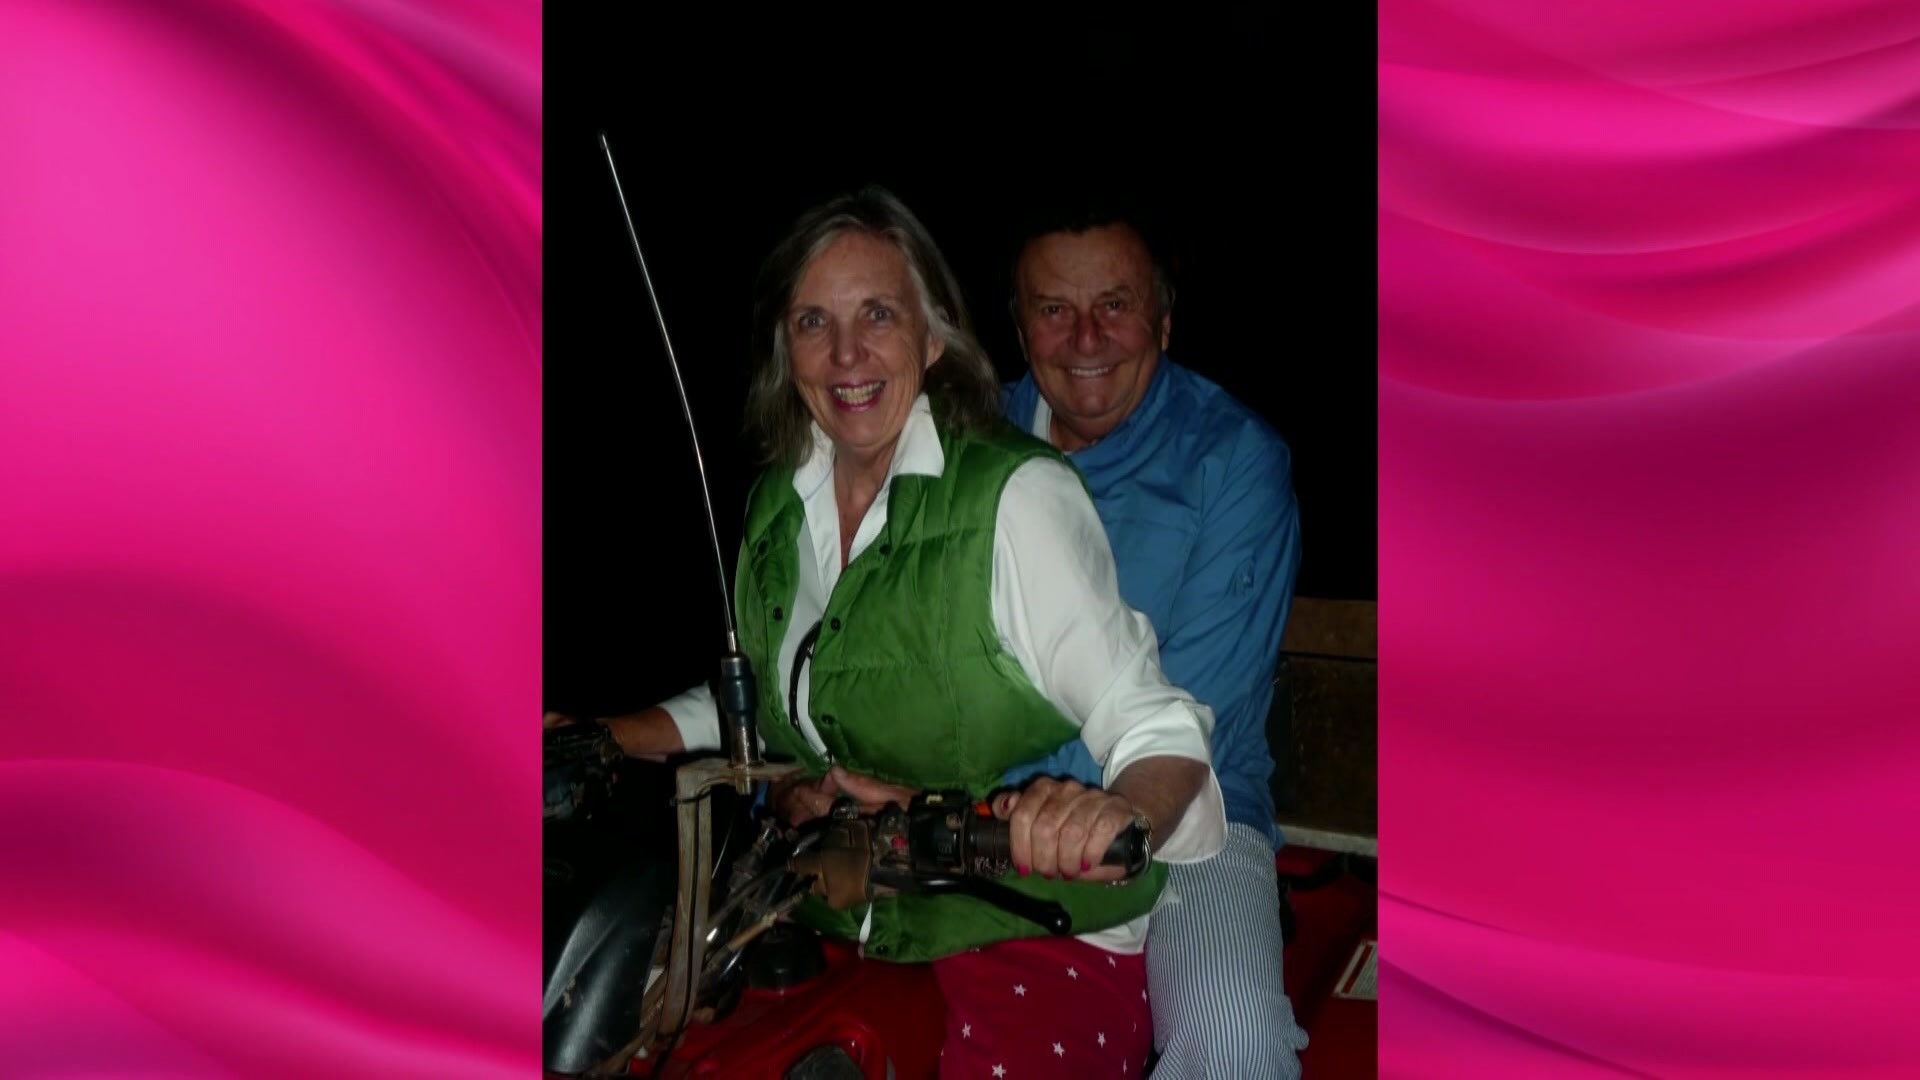 Barry Humphries and his wife on a bike.